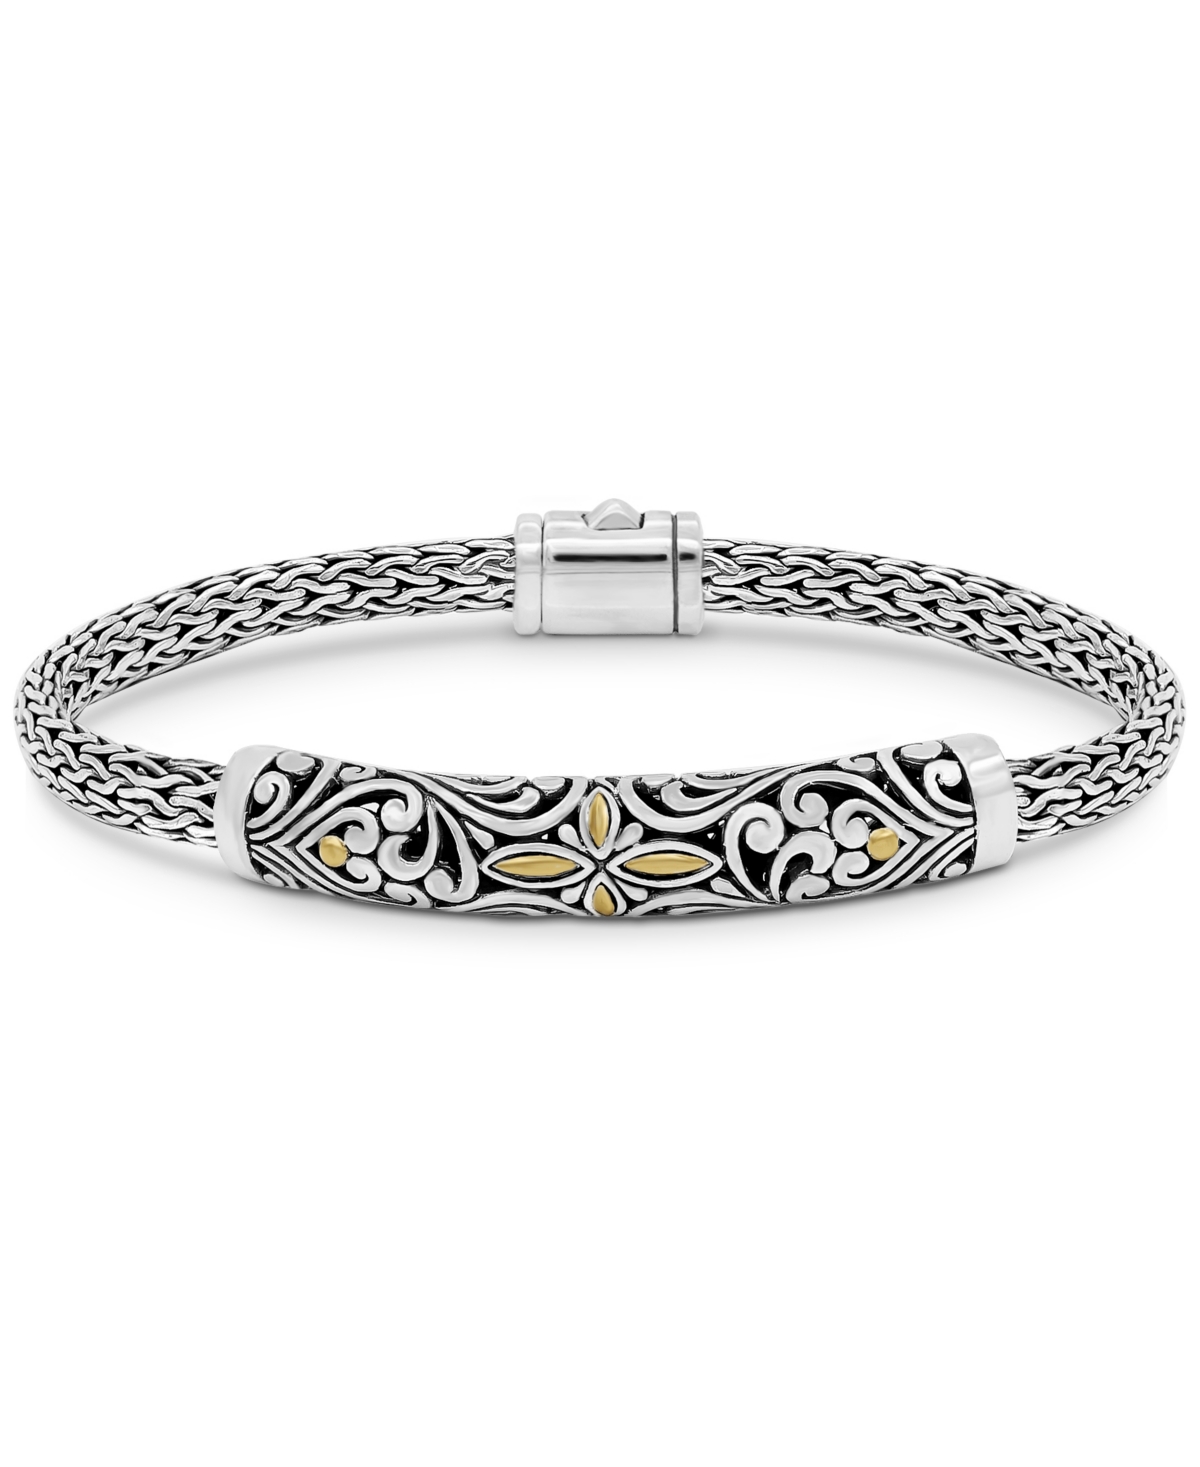 Bali Filigree with Dragon Bone Chain Bracelet in Sterling Silver and 18K Gold - Silver